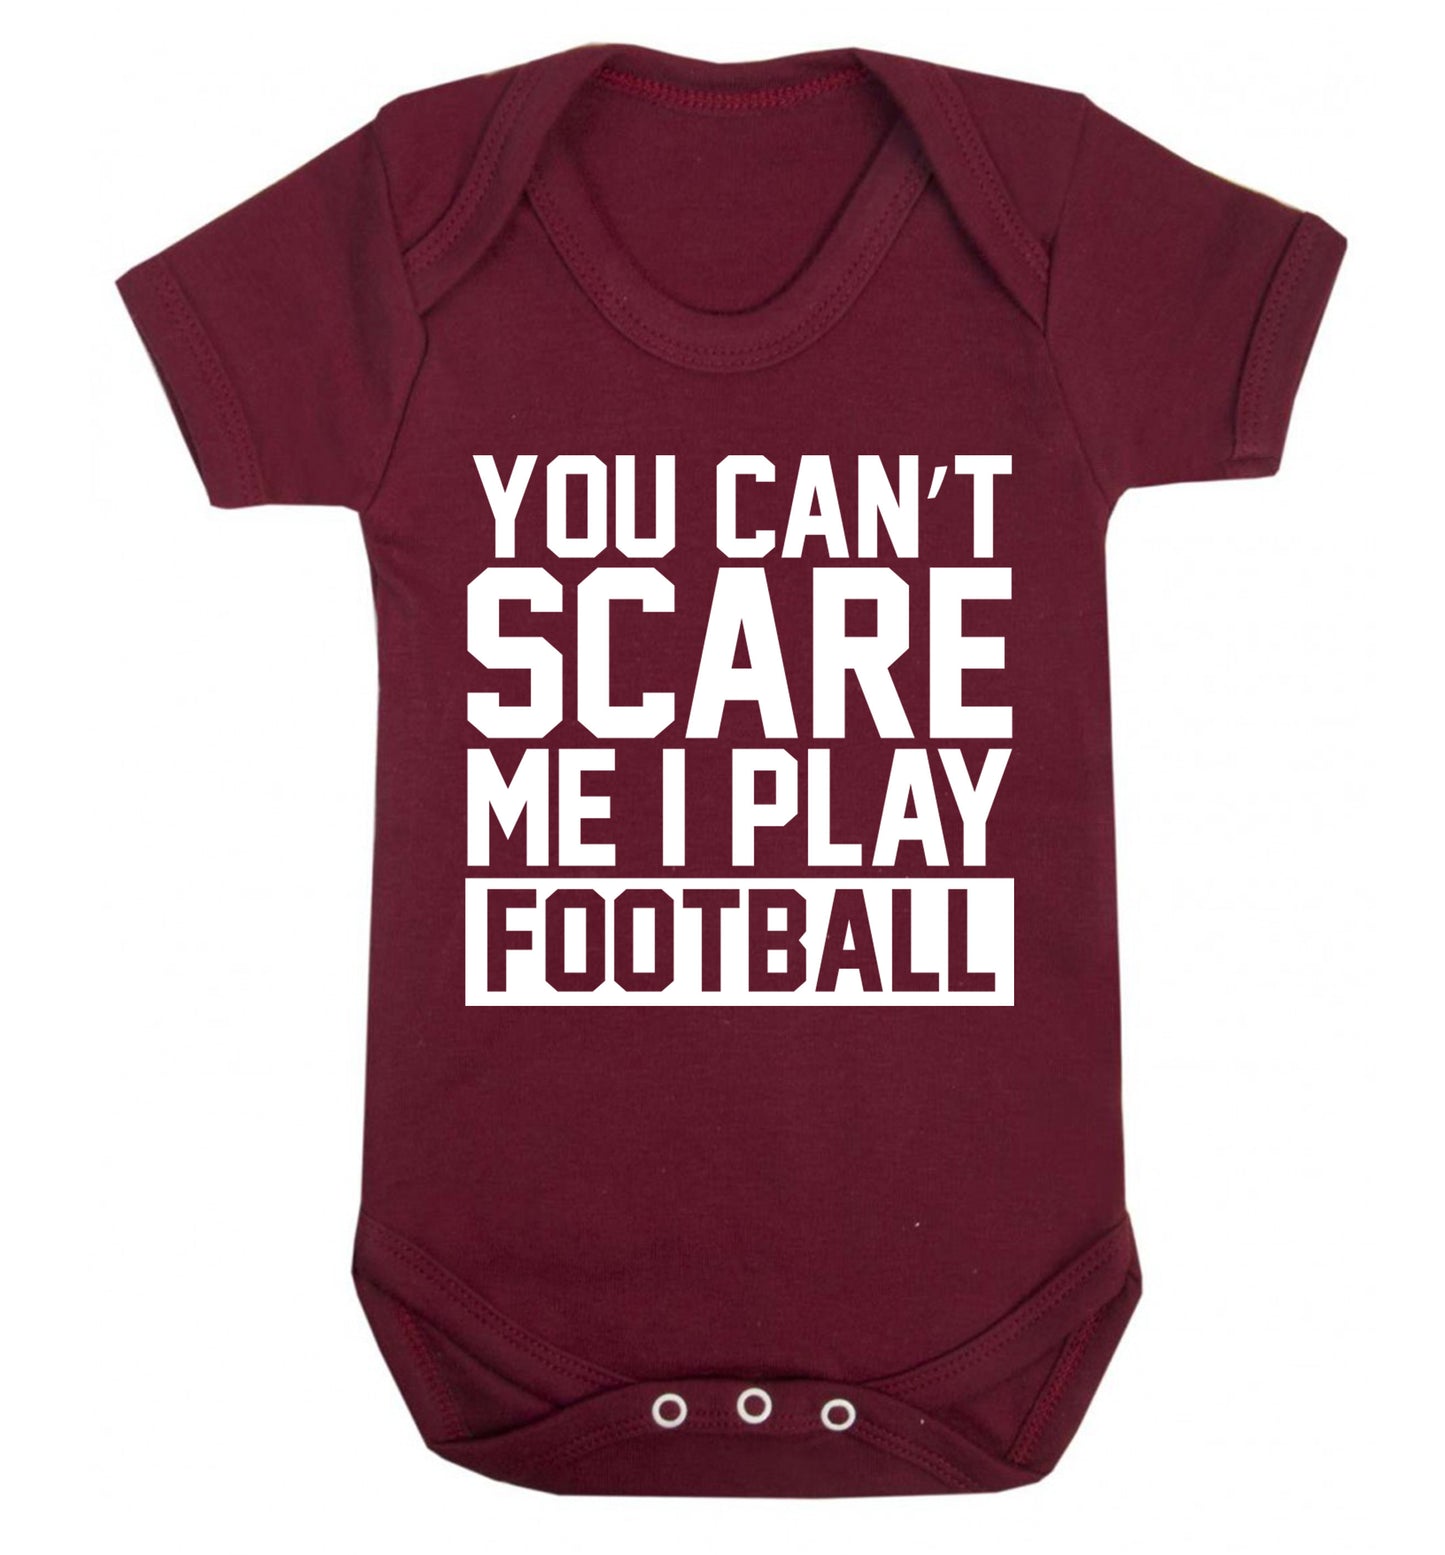 You can't scare me I play football Baby Vest maroon 18-24 months